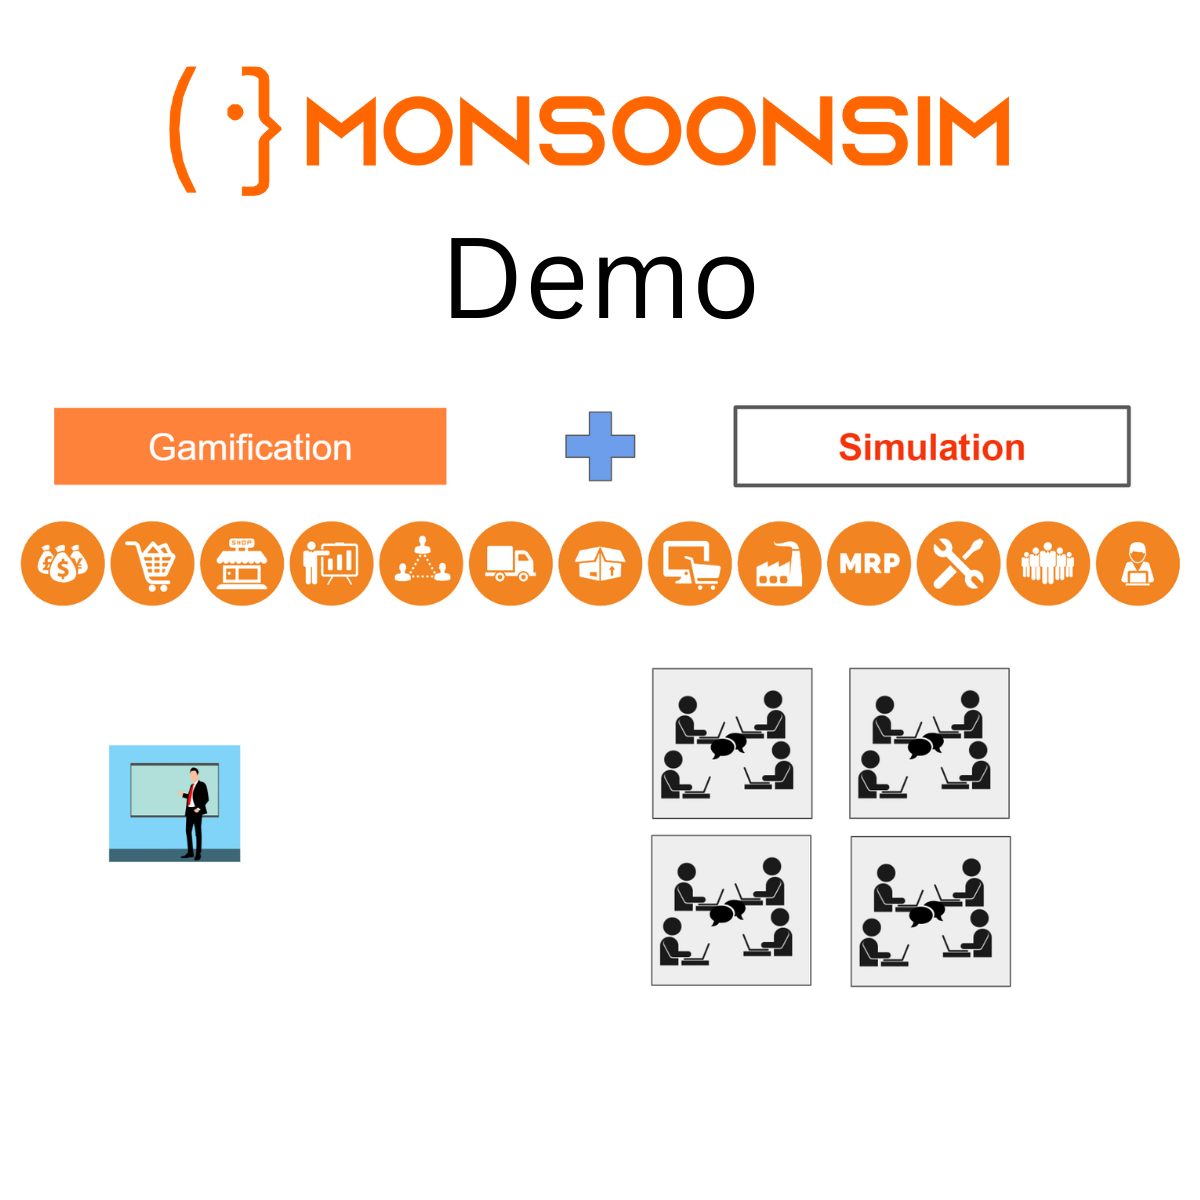 Visual representation of MONSOONSIM's demo, highlighting the convergence of 'Gamification' and 'Simulation'. The 'Gamification' section is represented with a series of icons denoting different activities and tasks. Adjacent to it is the 'Simulation' section with three graphics illustrating interconnected human figures, denoting teamwork and collaboration.